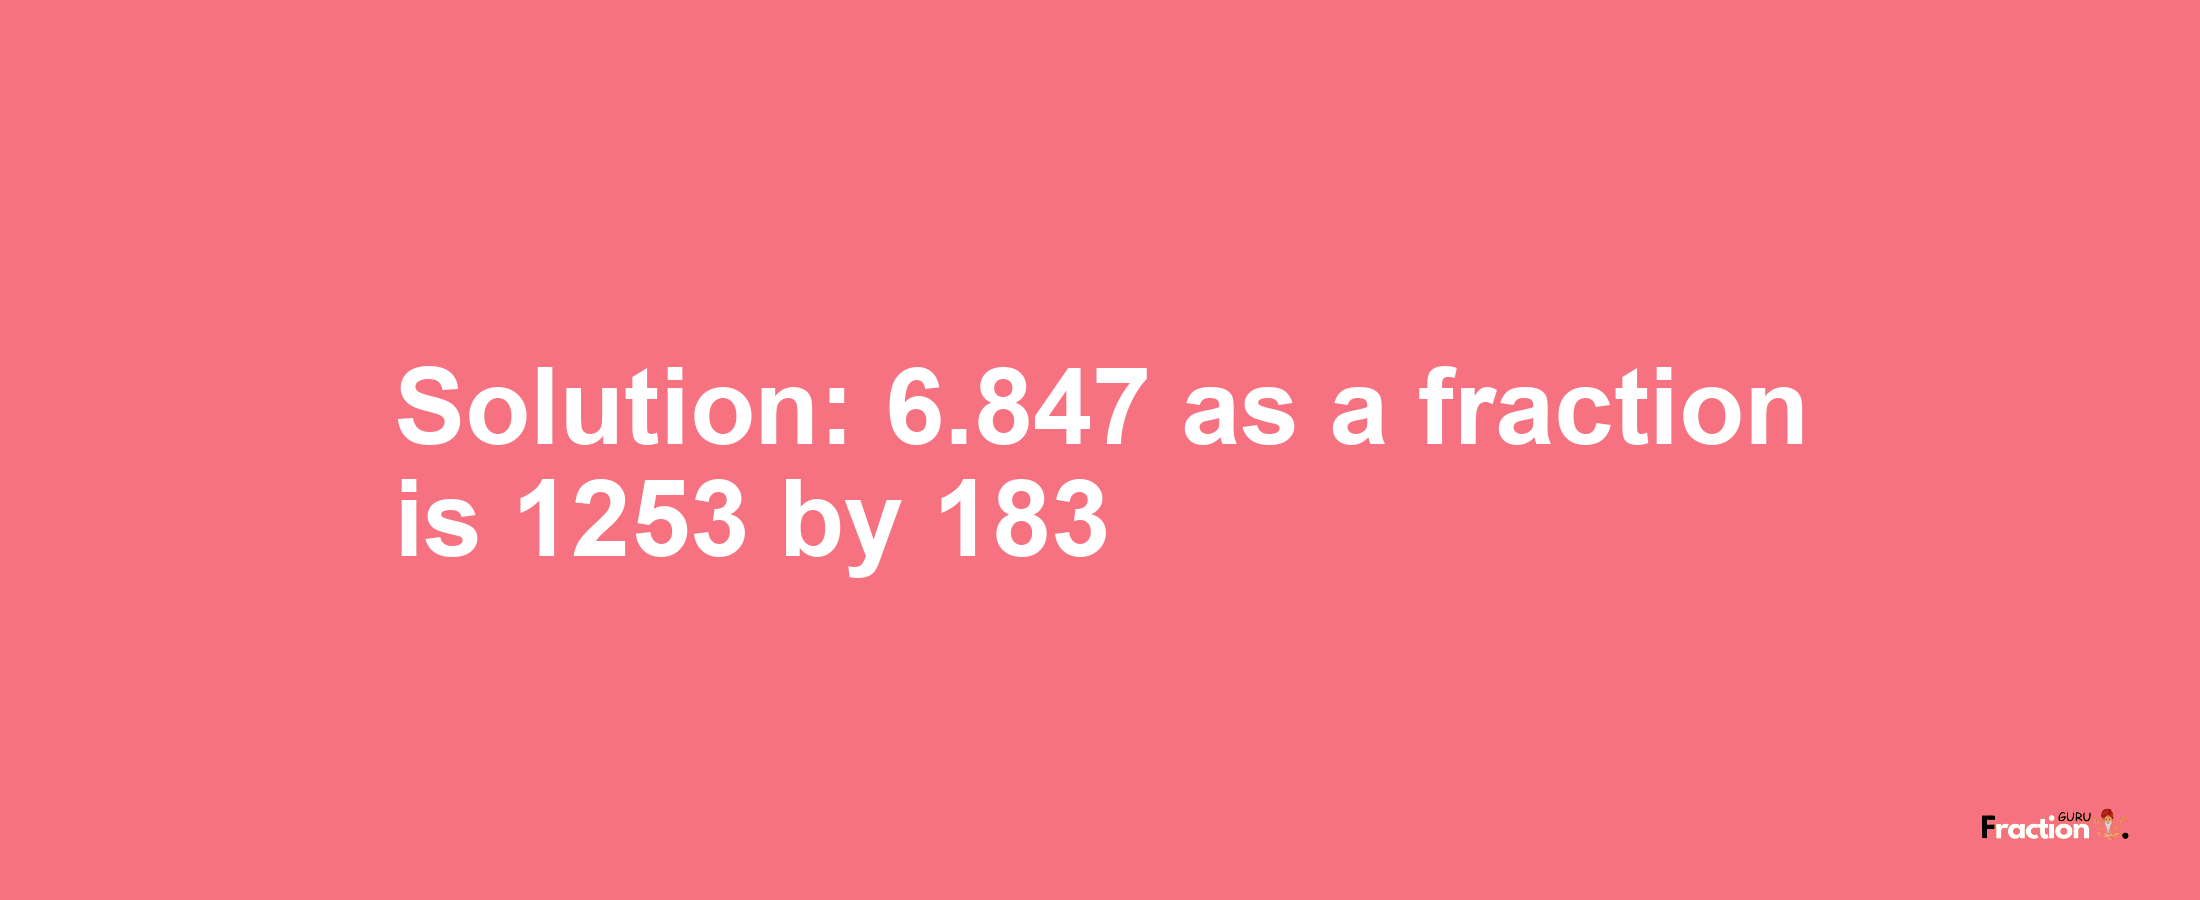 Solution:6.847 as a fraction is 1253/183